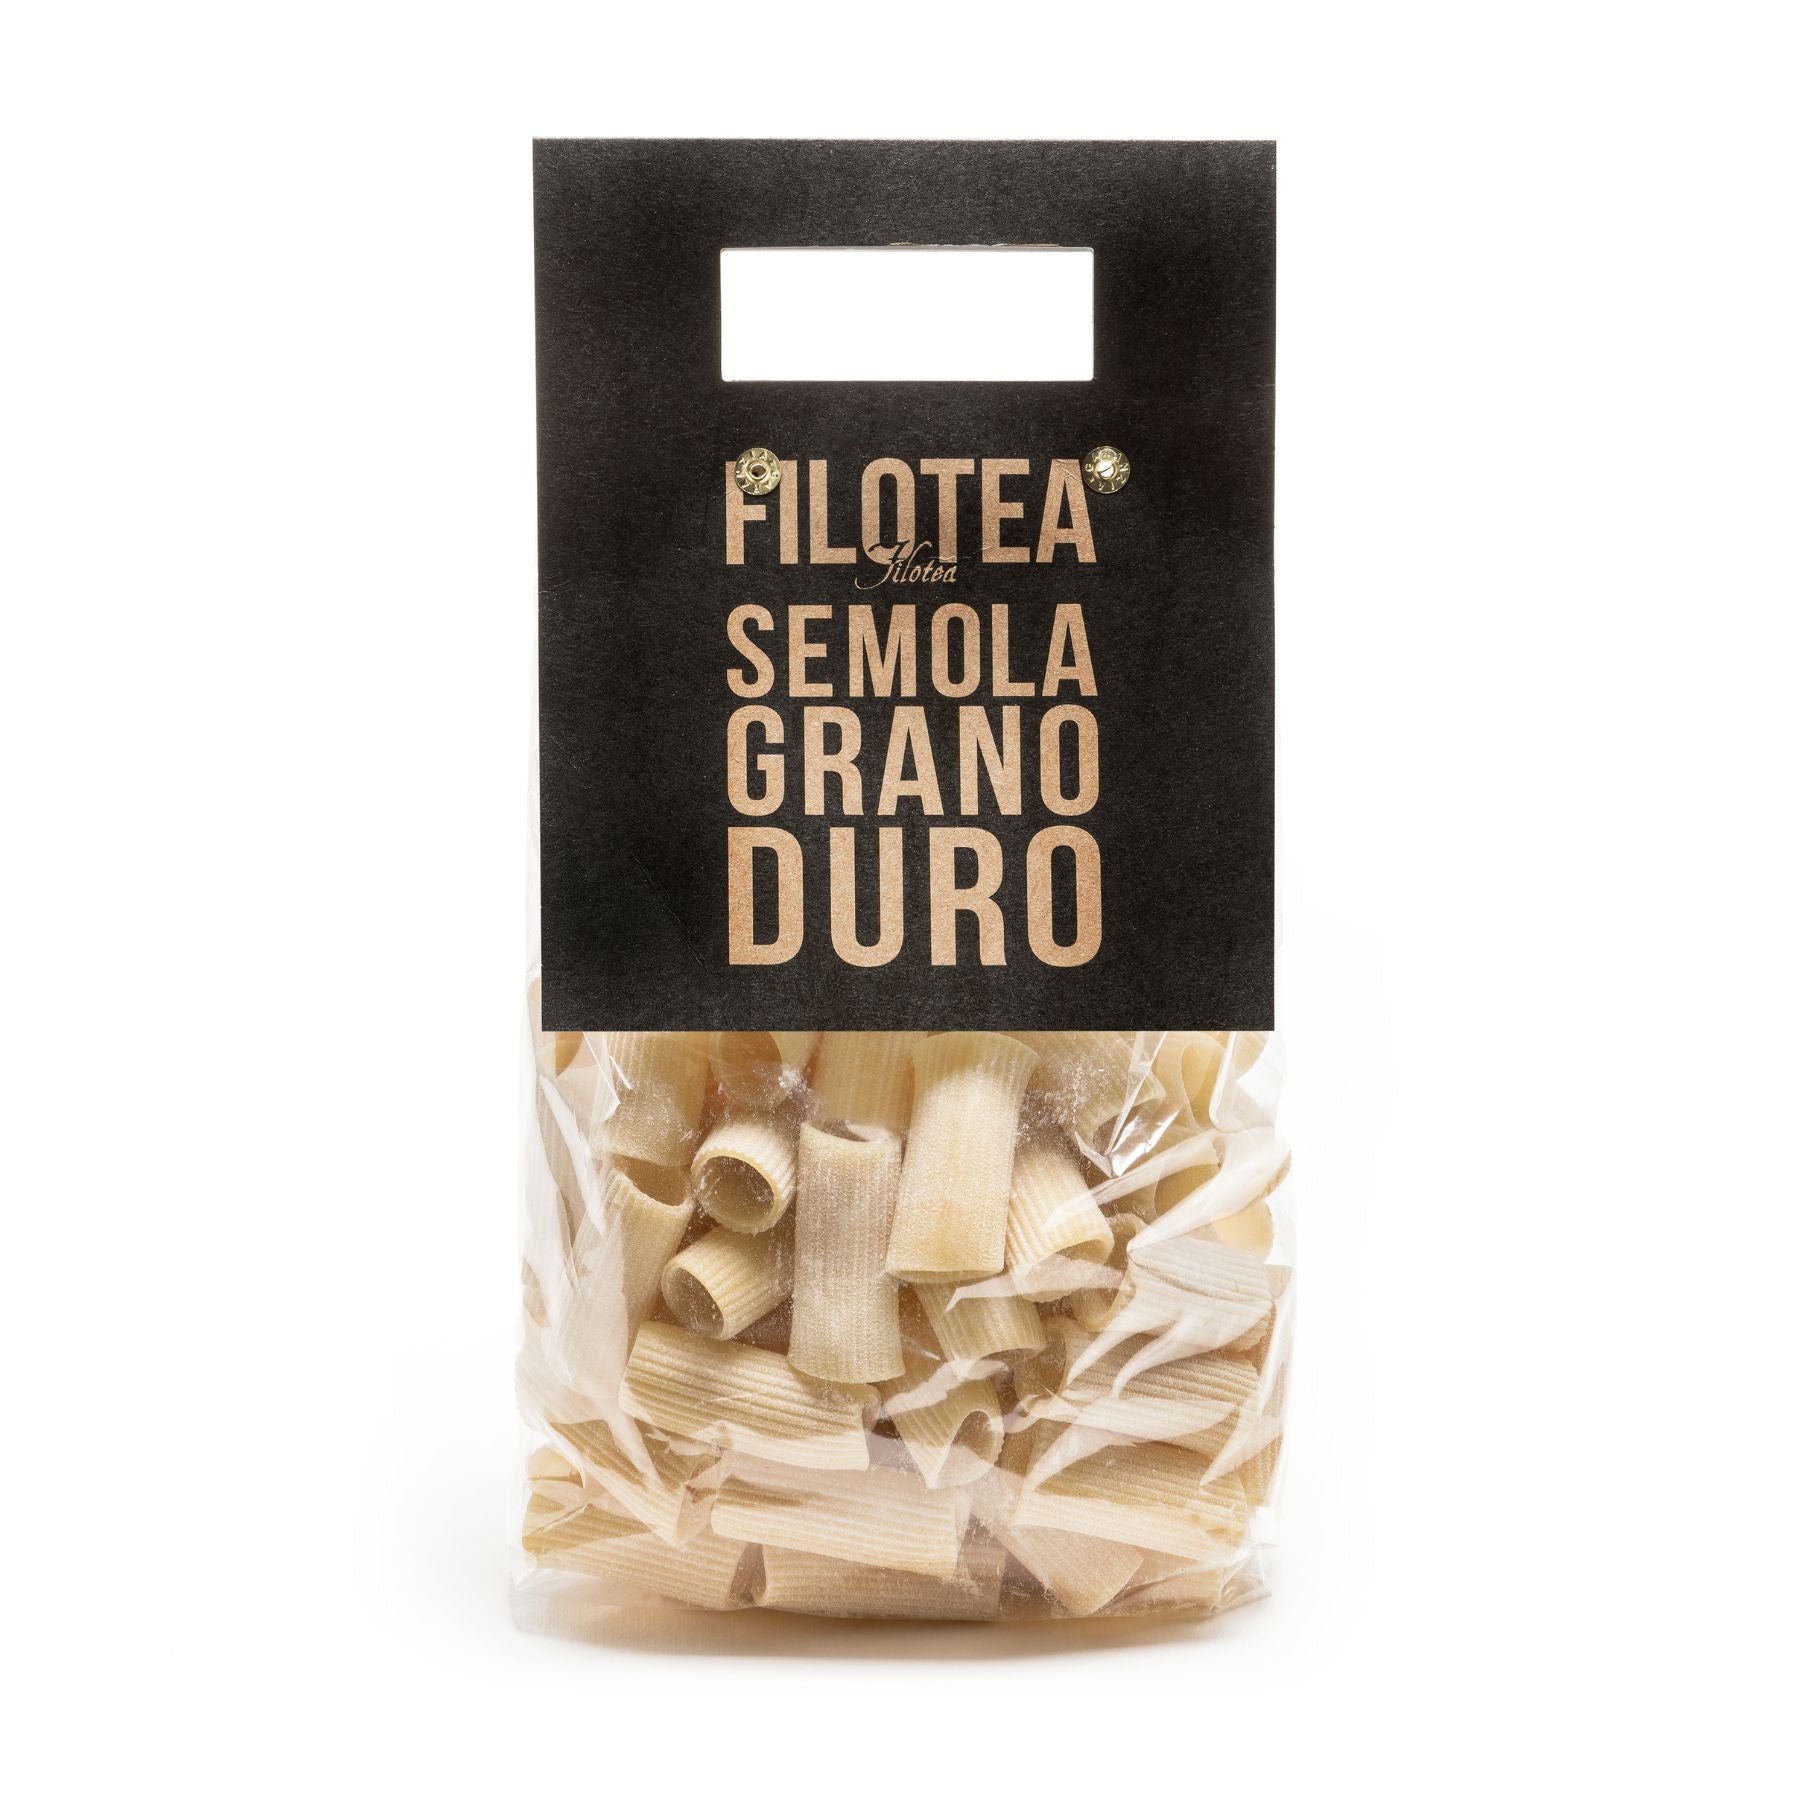 Filotea Rigatoni Durum Wheat Pasta 500g | Imported and distributed in the UK by Just Gourmet Foods